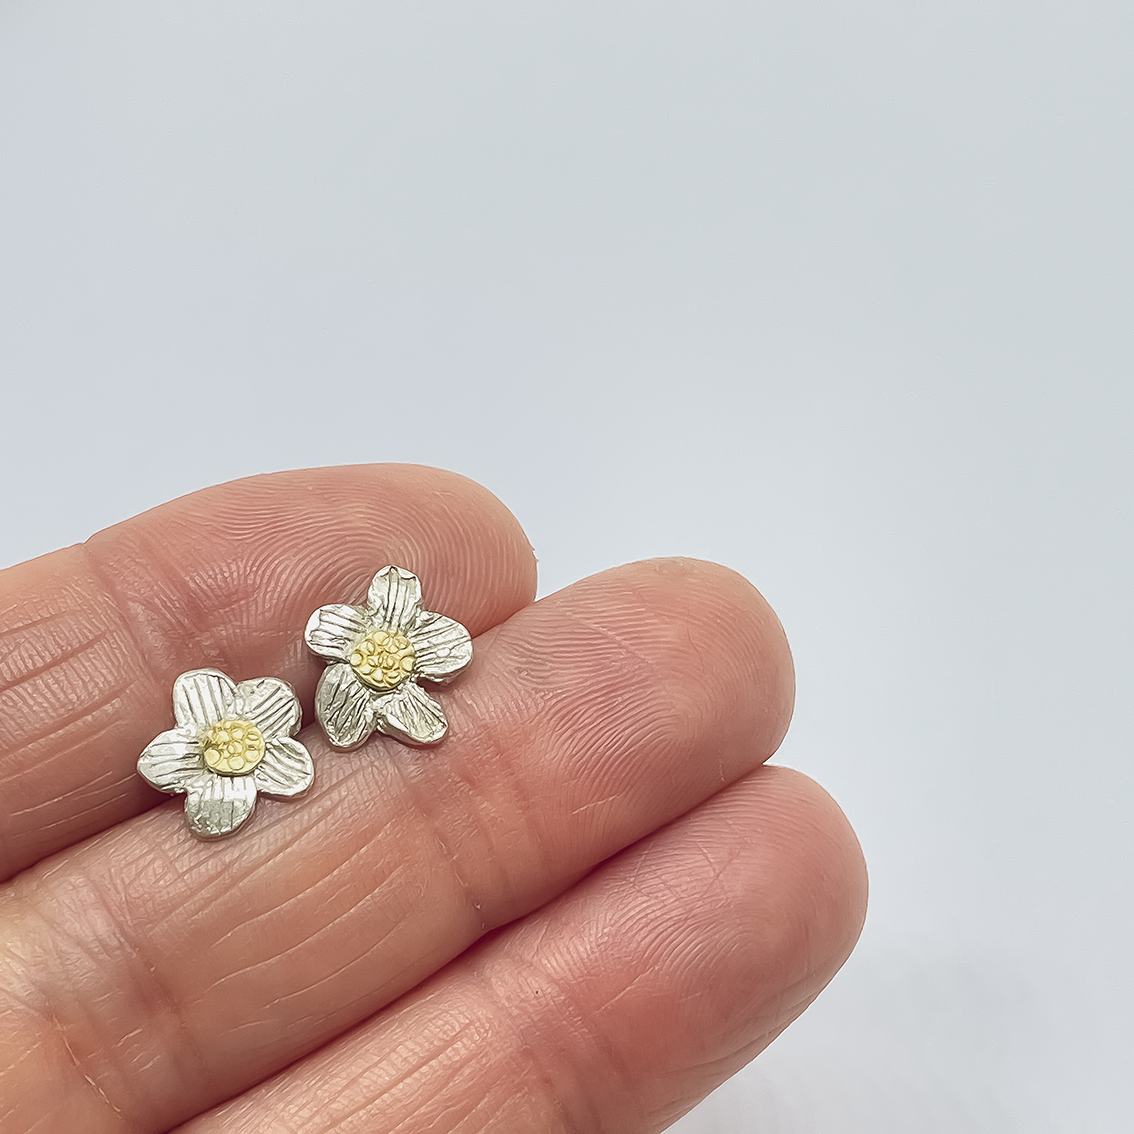 Two small daisy flower studs in Sterling Silver and 18ct yellow Gold centers held between fingers